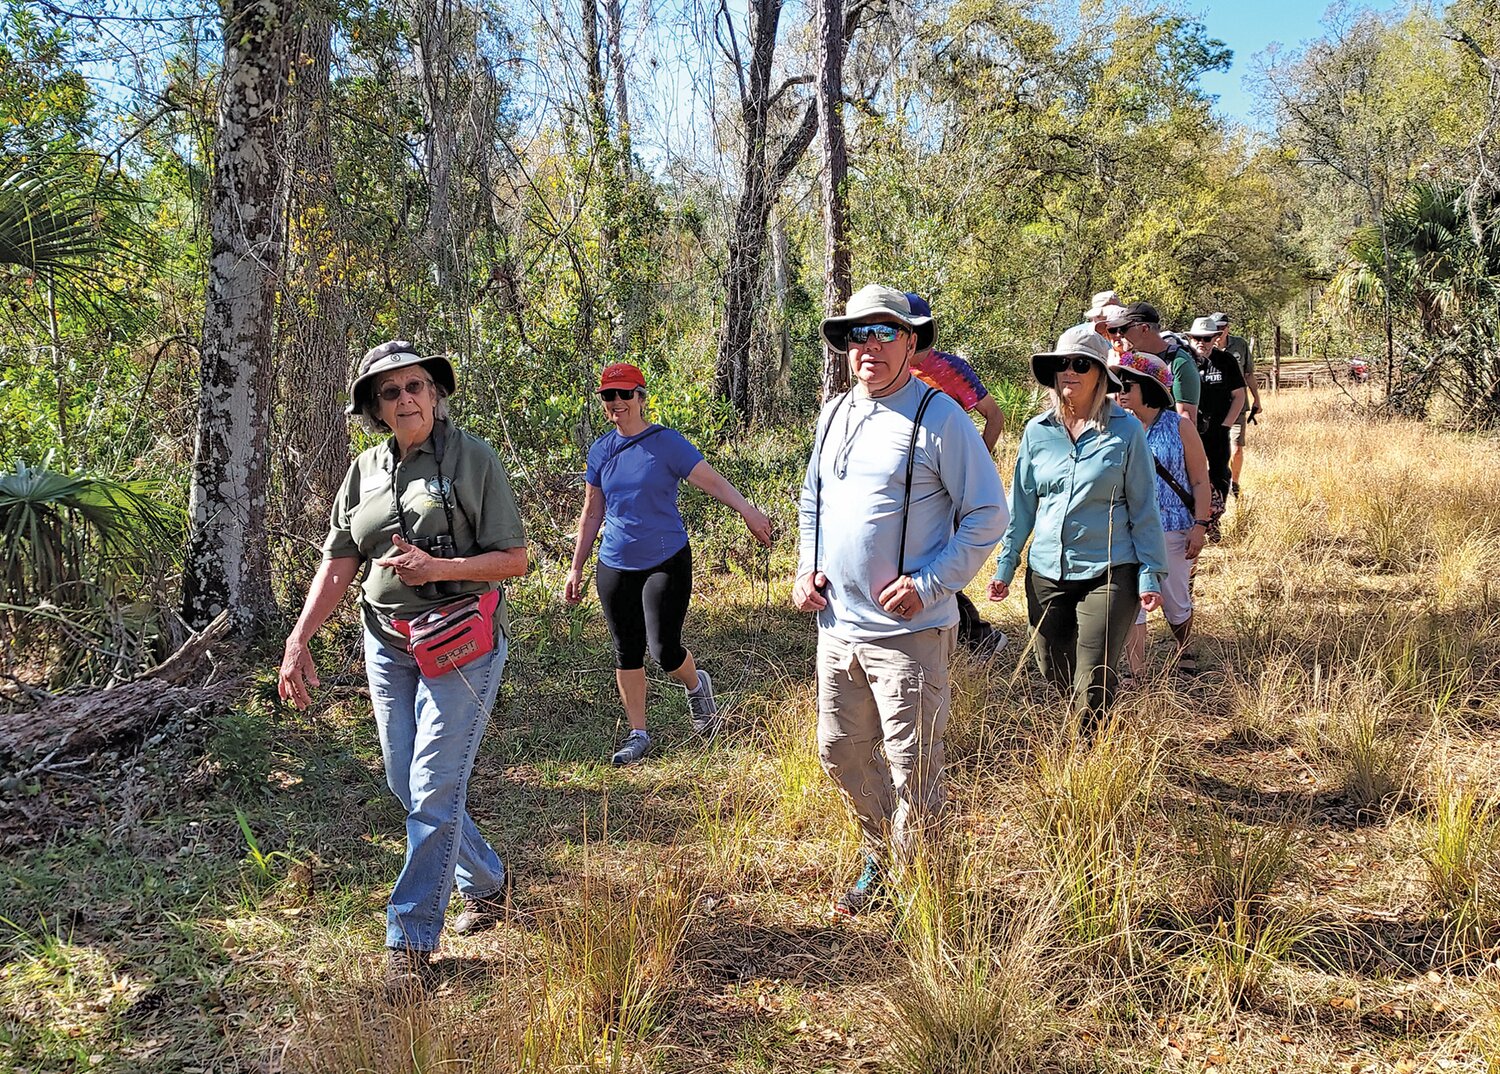 Volunteer Marilyn Blair leads a group to the Tiger Branch area of the park on a scrub walk where Florida scrub-jays may be sighted.